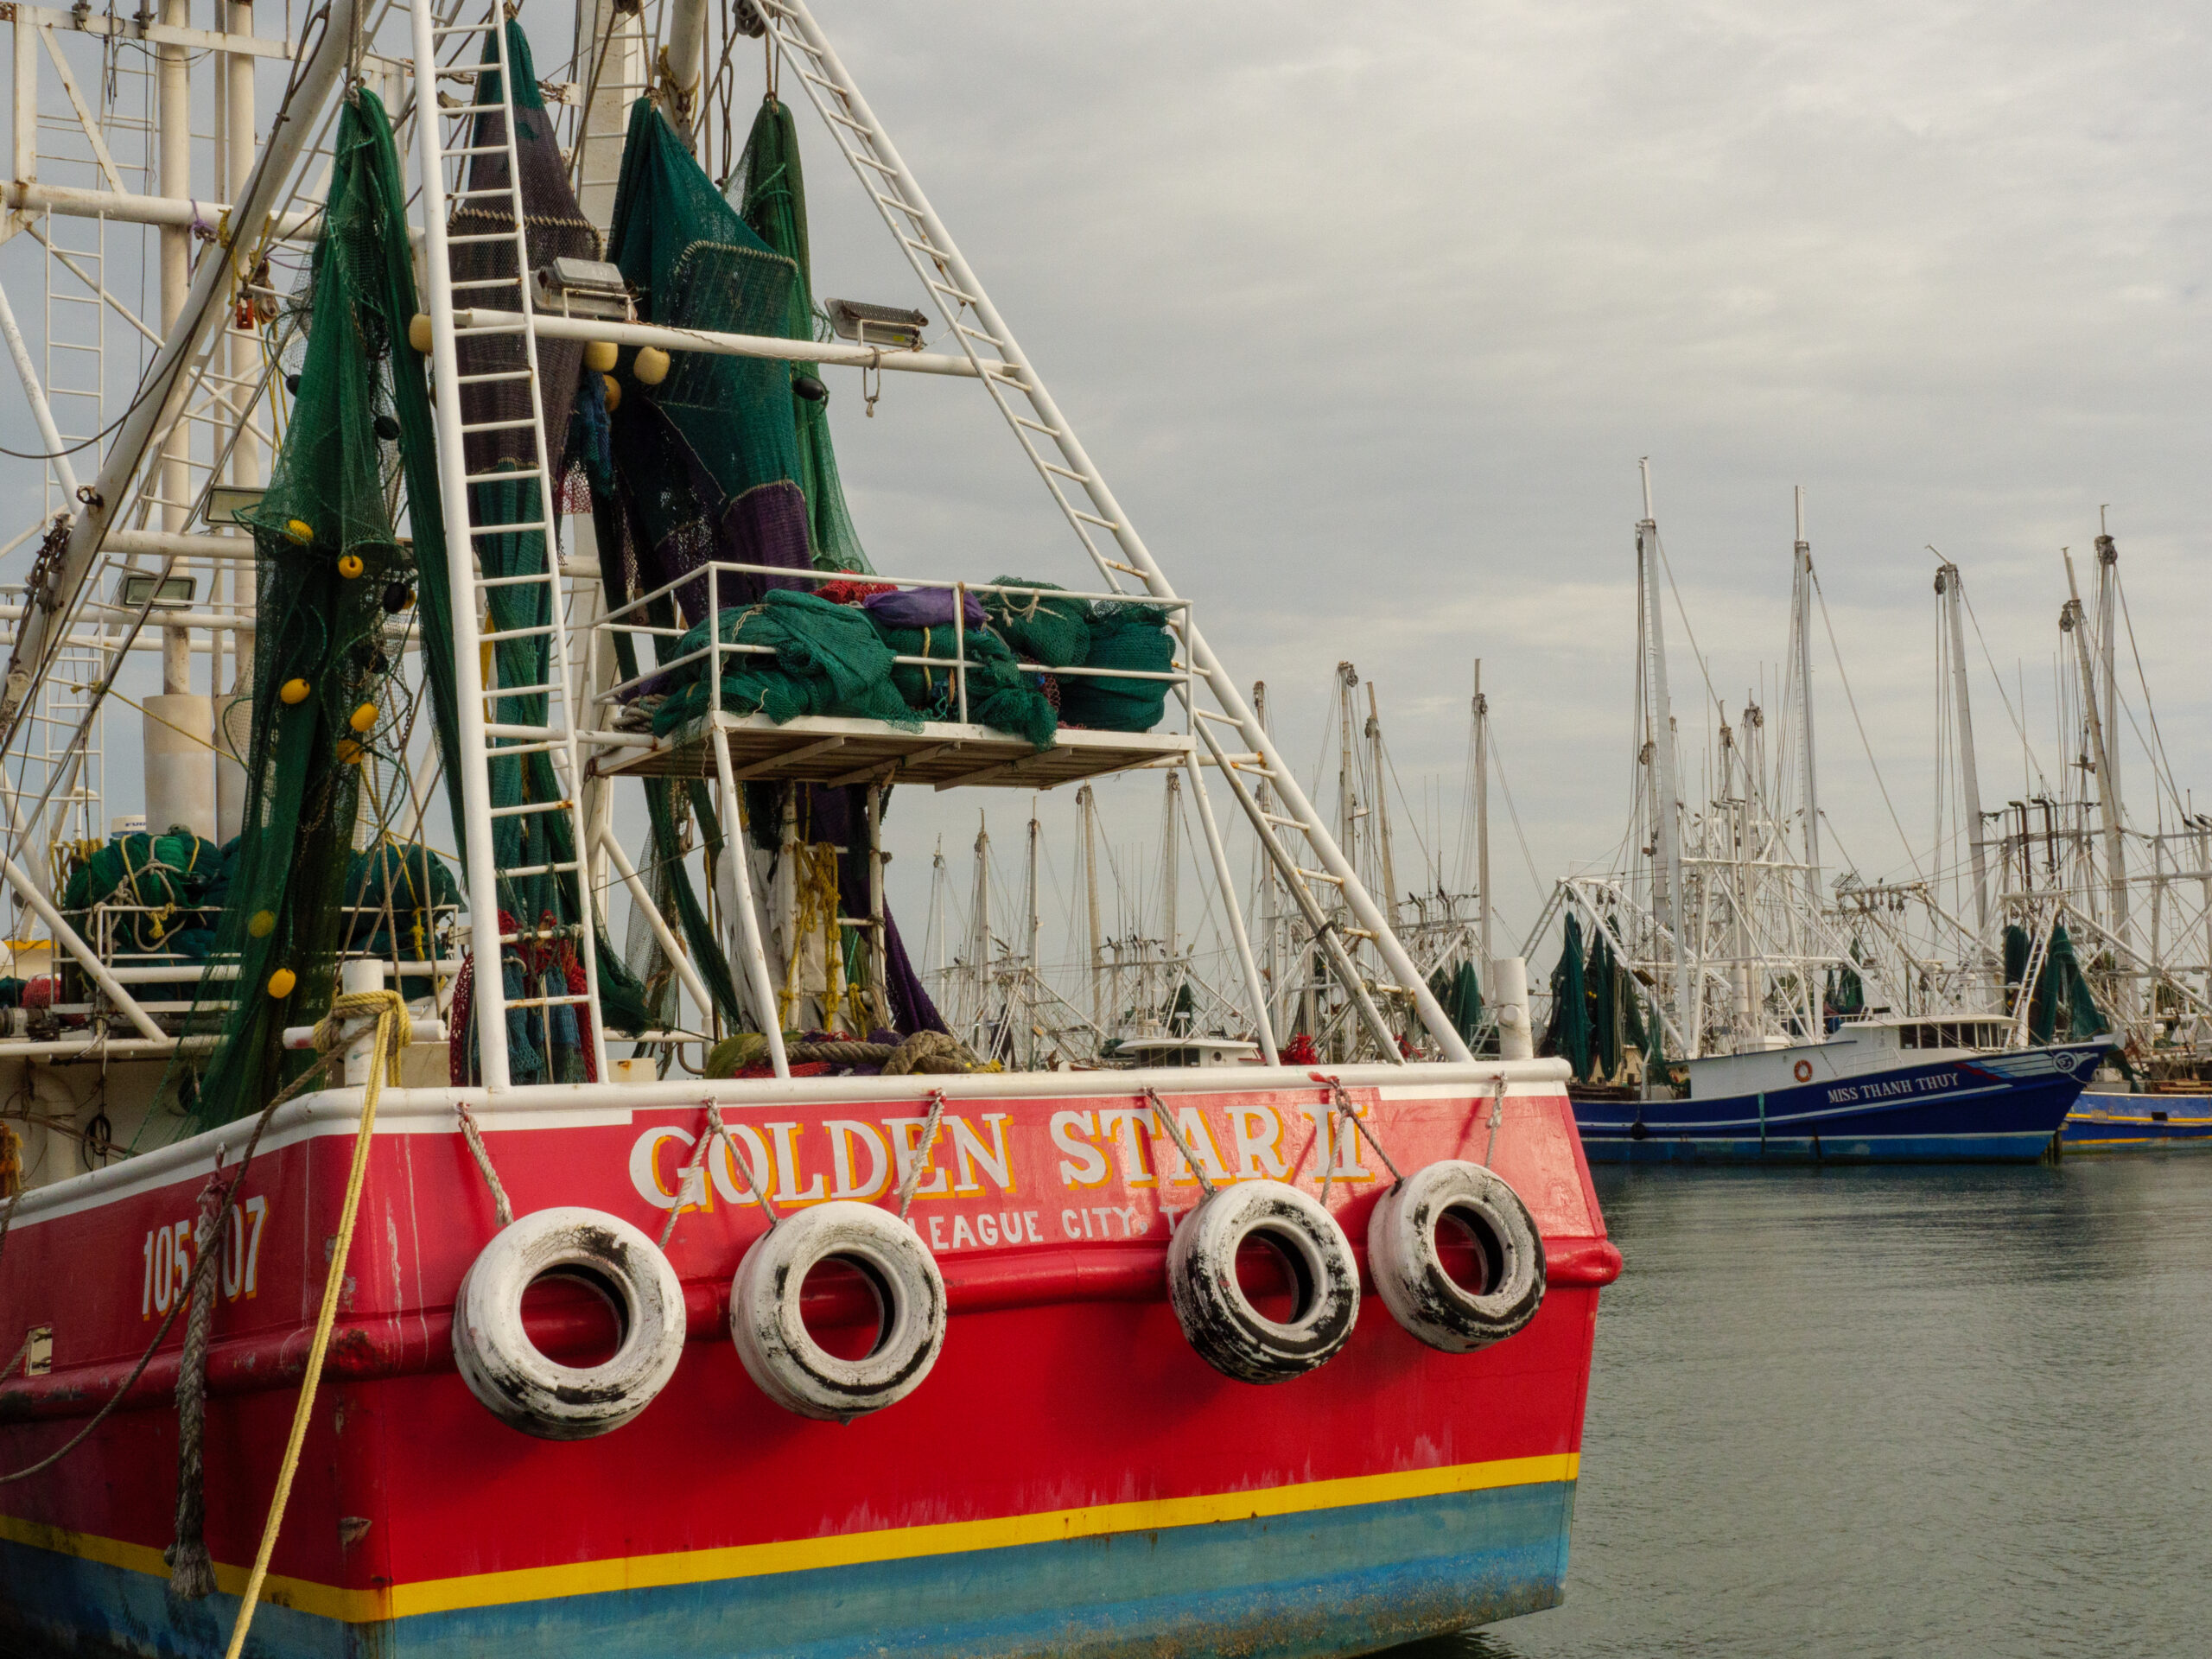 A red ship with its name in white, also declaring the boat is from League City. Green shrimp nets hang from the masts. Many other shrimp boats are visible in the densely packed marina.